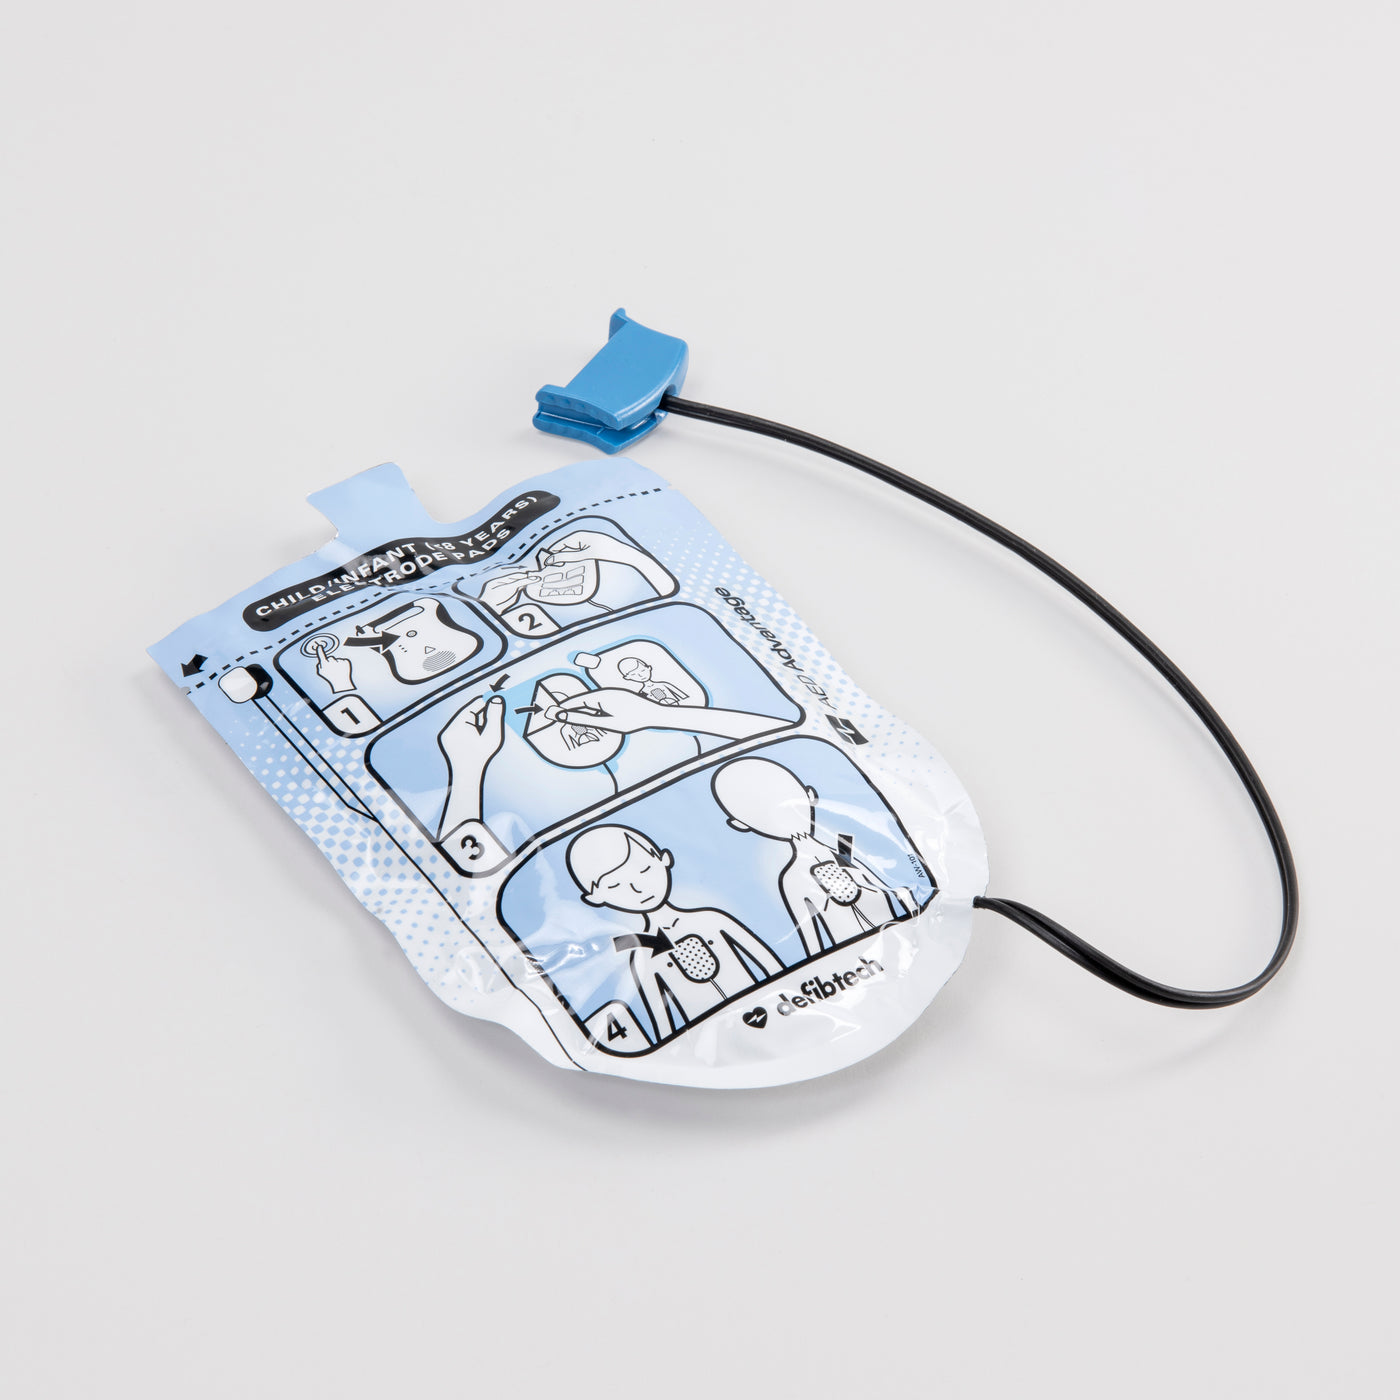 A set of pediatric Defibtech Lifeline electrodes encased in their blue foil wrap with a black connector cord